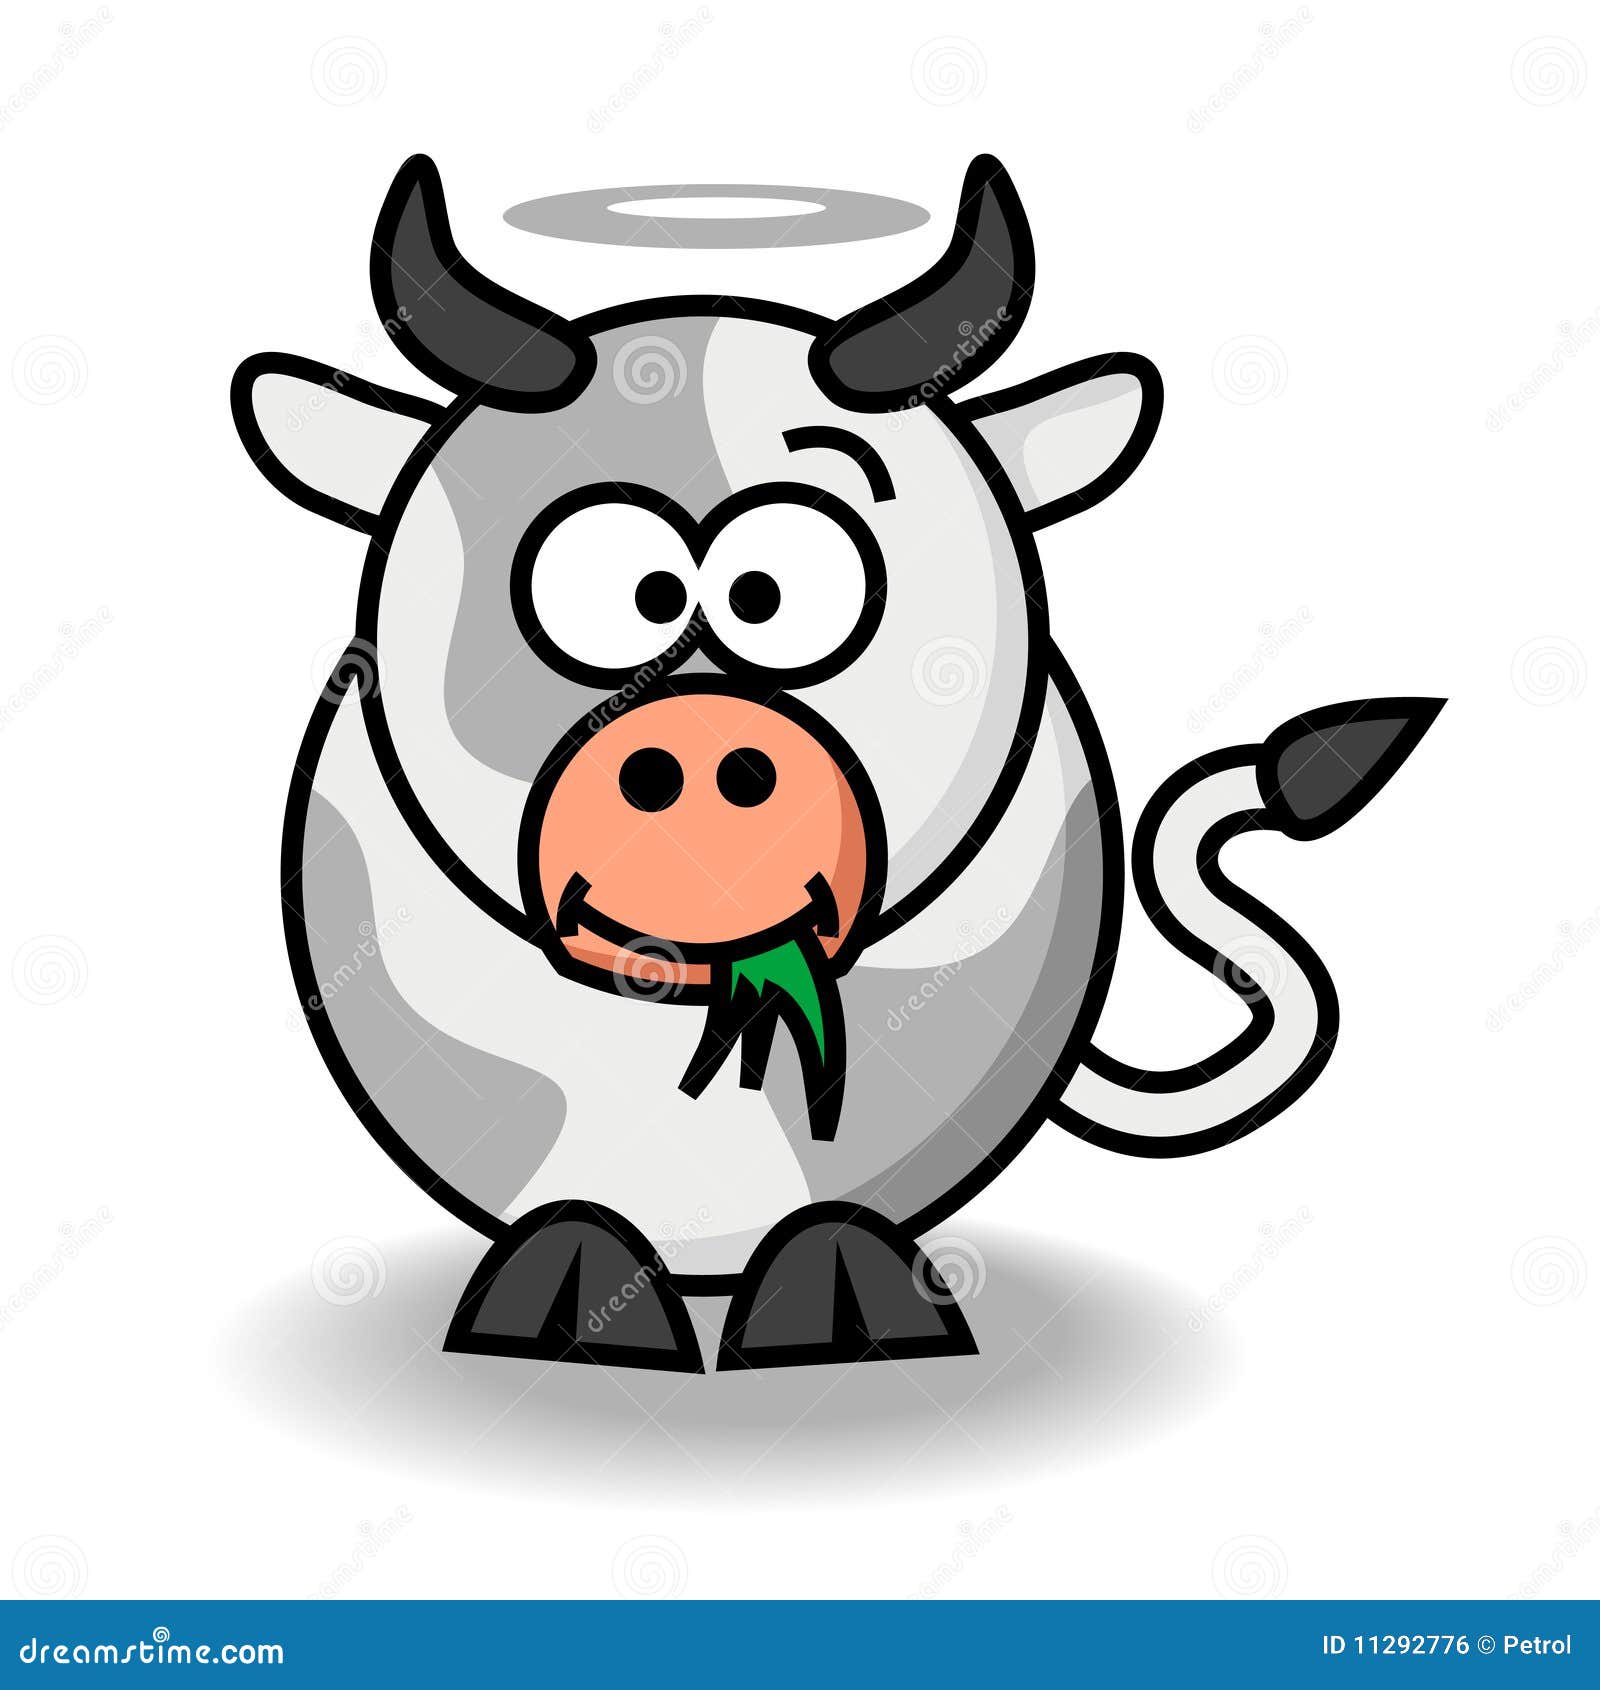 holy cow clip art free - photo #6